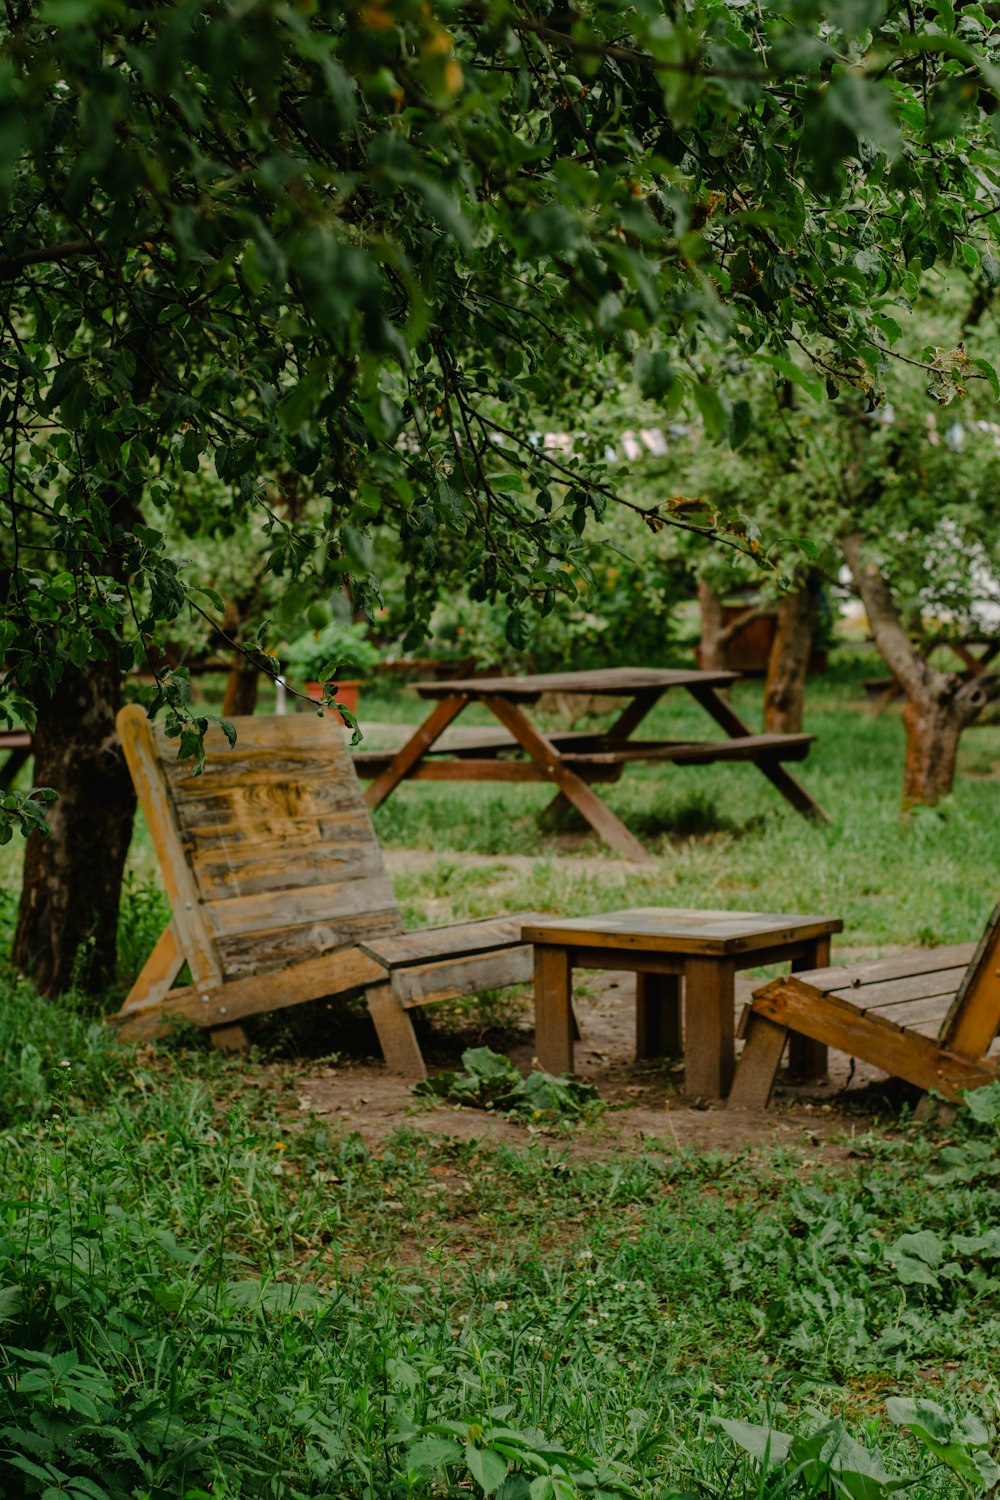 a picnic table and benches in a grassy area